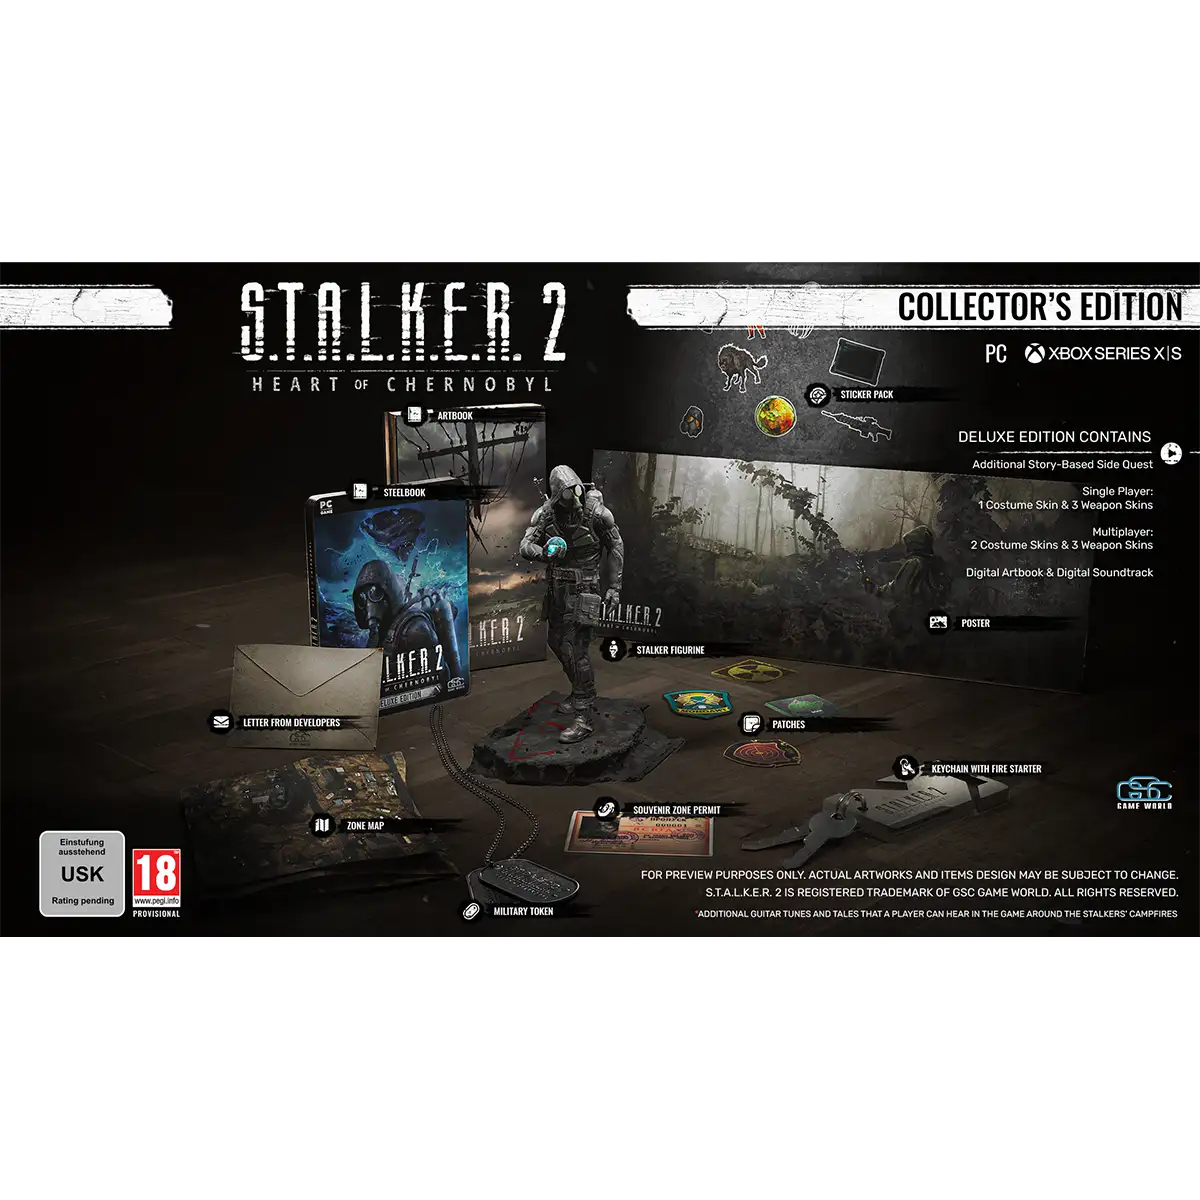 S.T.A.L.K.E.R. 2: Heart of Chornobyl Collector's Edition (PC) Image 2